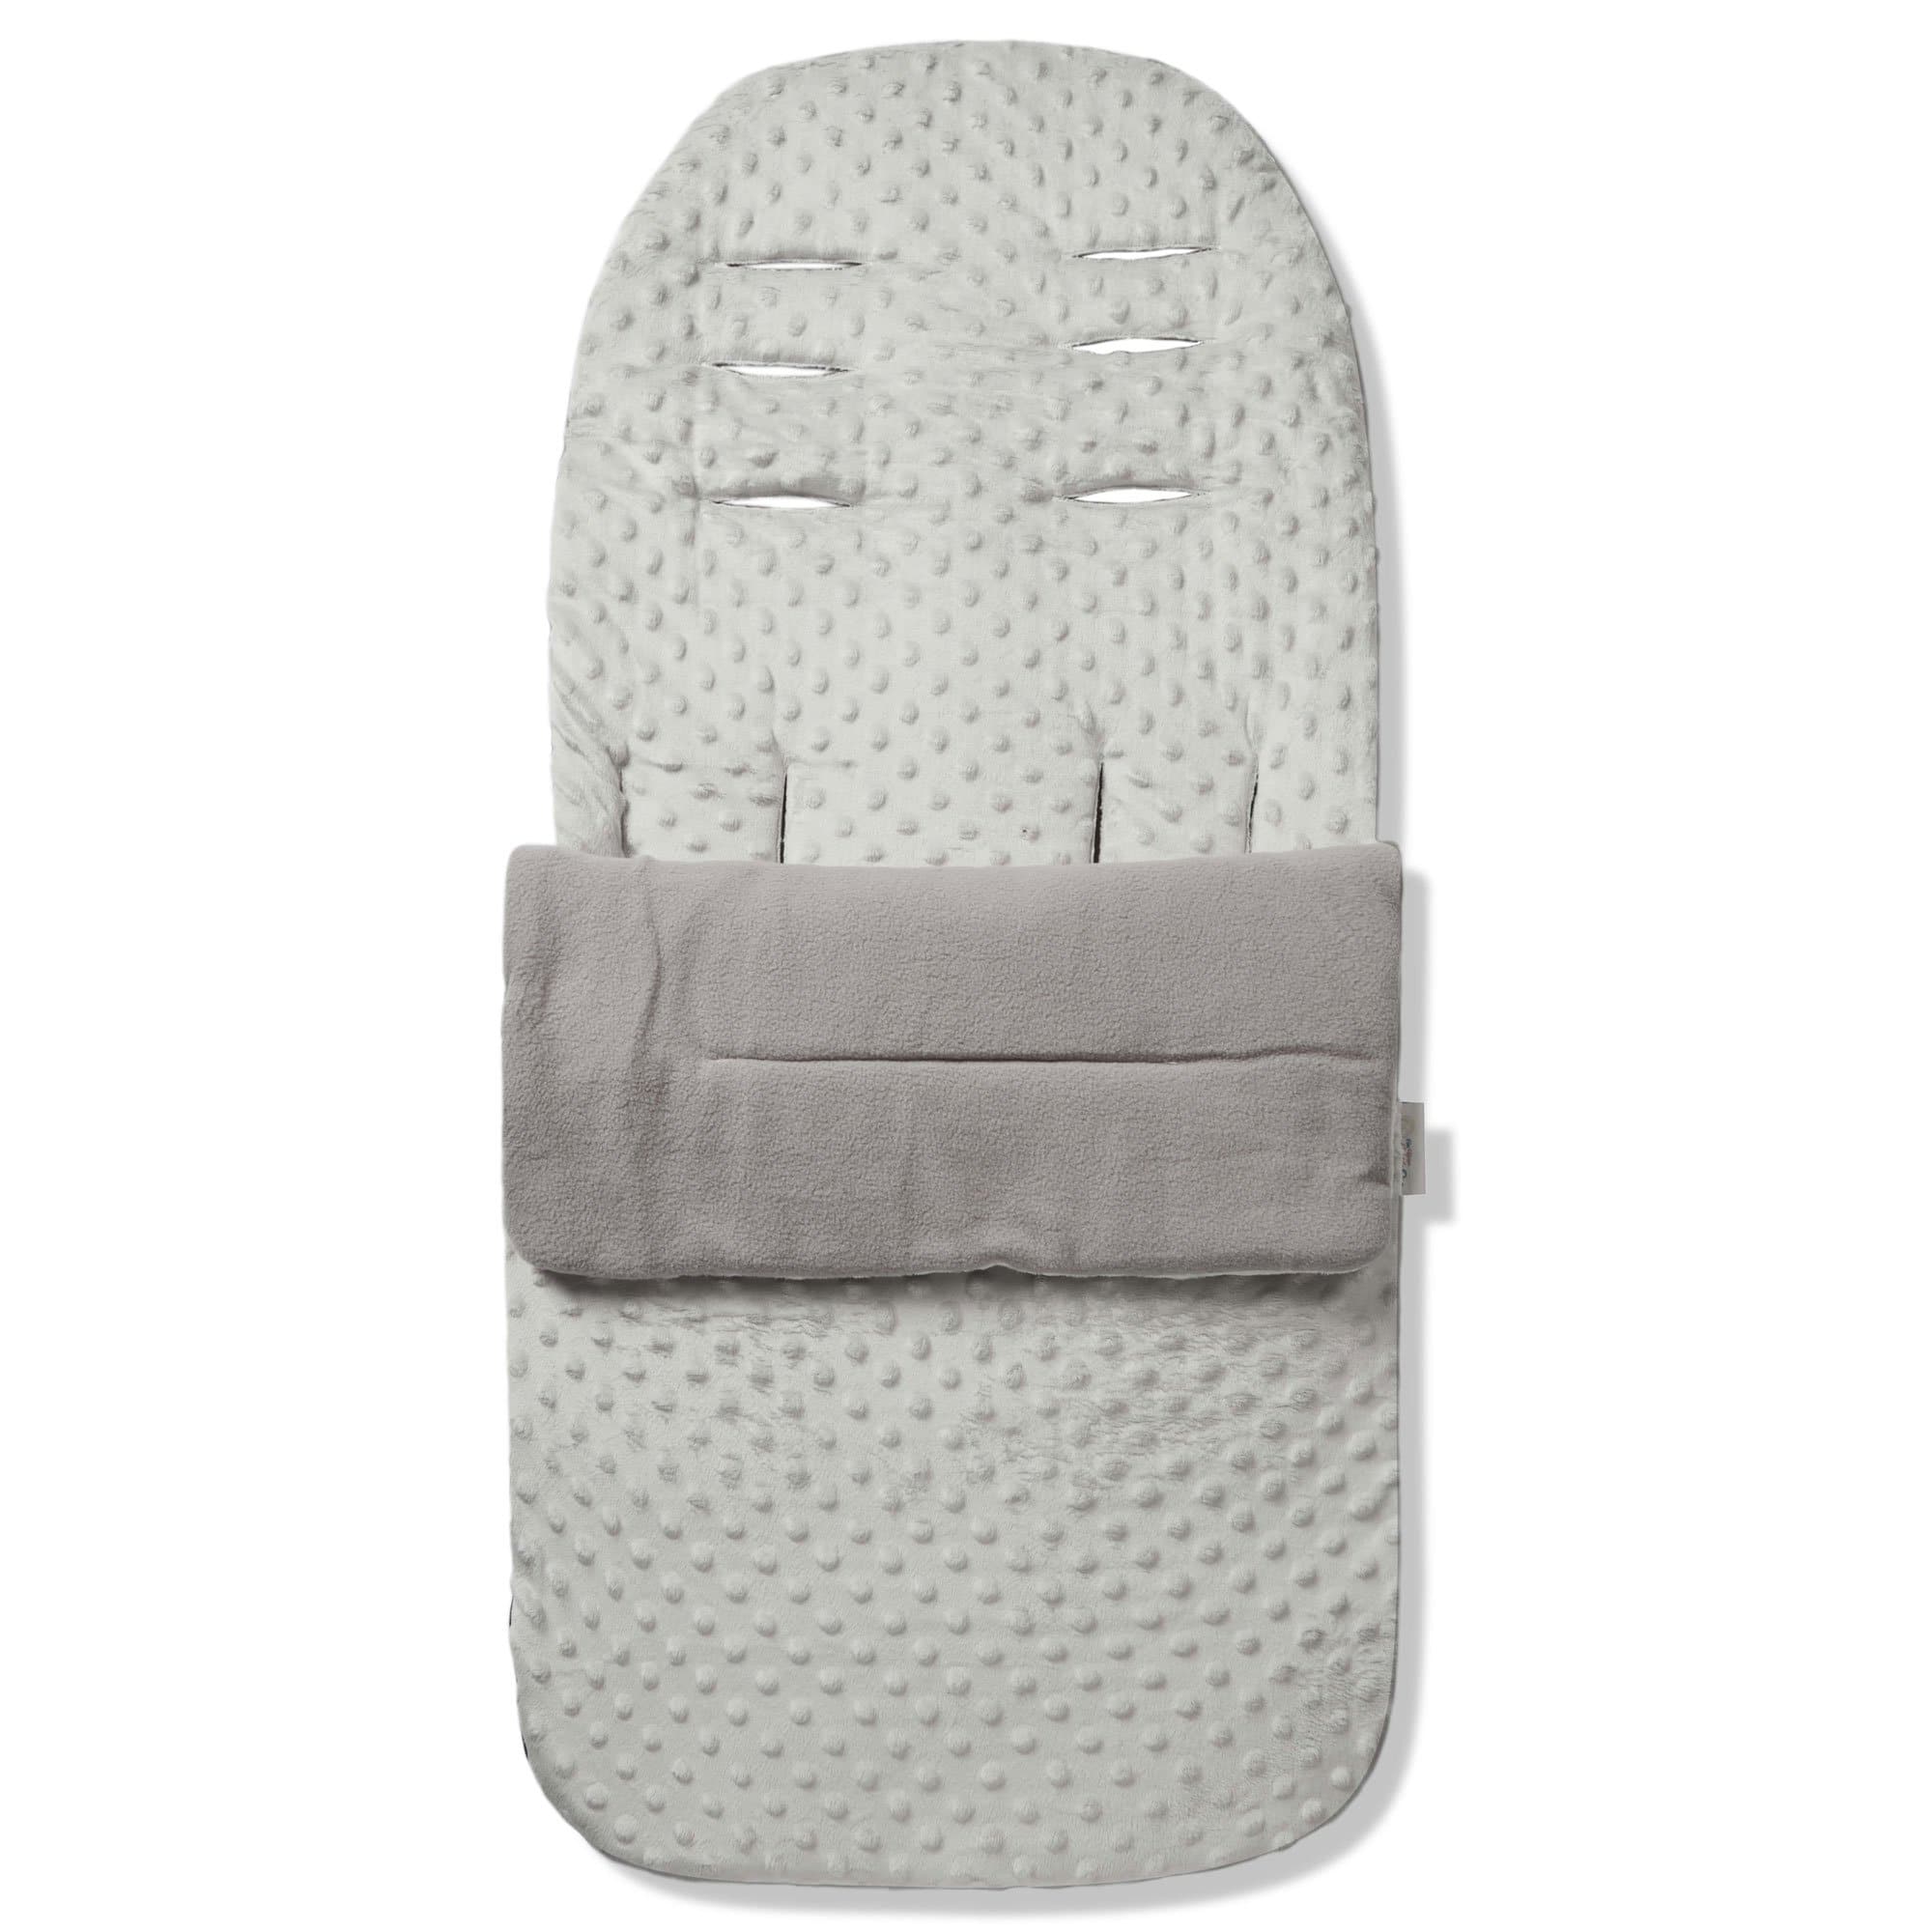 Dimple Footmuff / Cosy Toes Compatible with Peg Perego - Grey / Fits All Models | For Your Little One